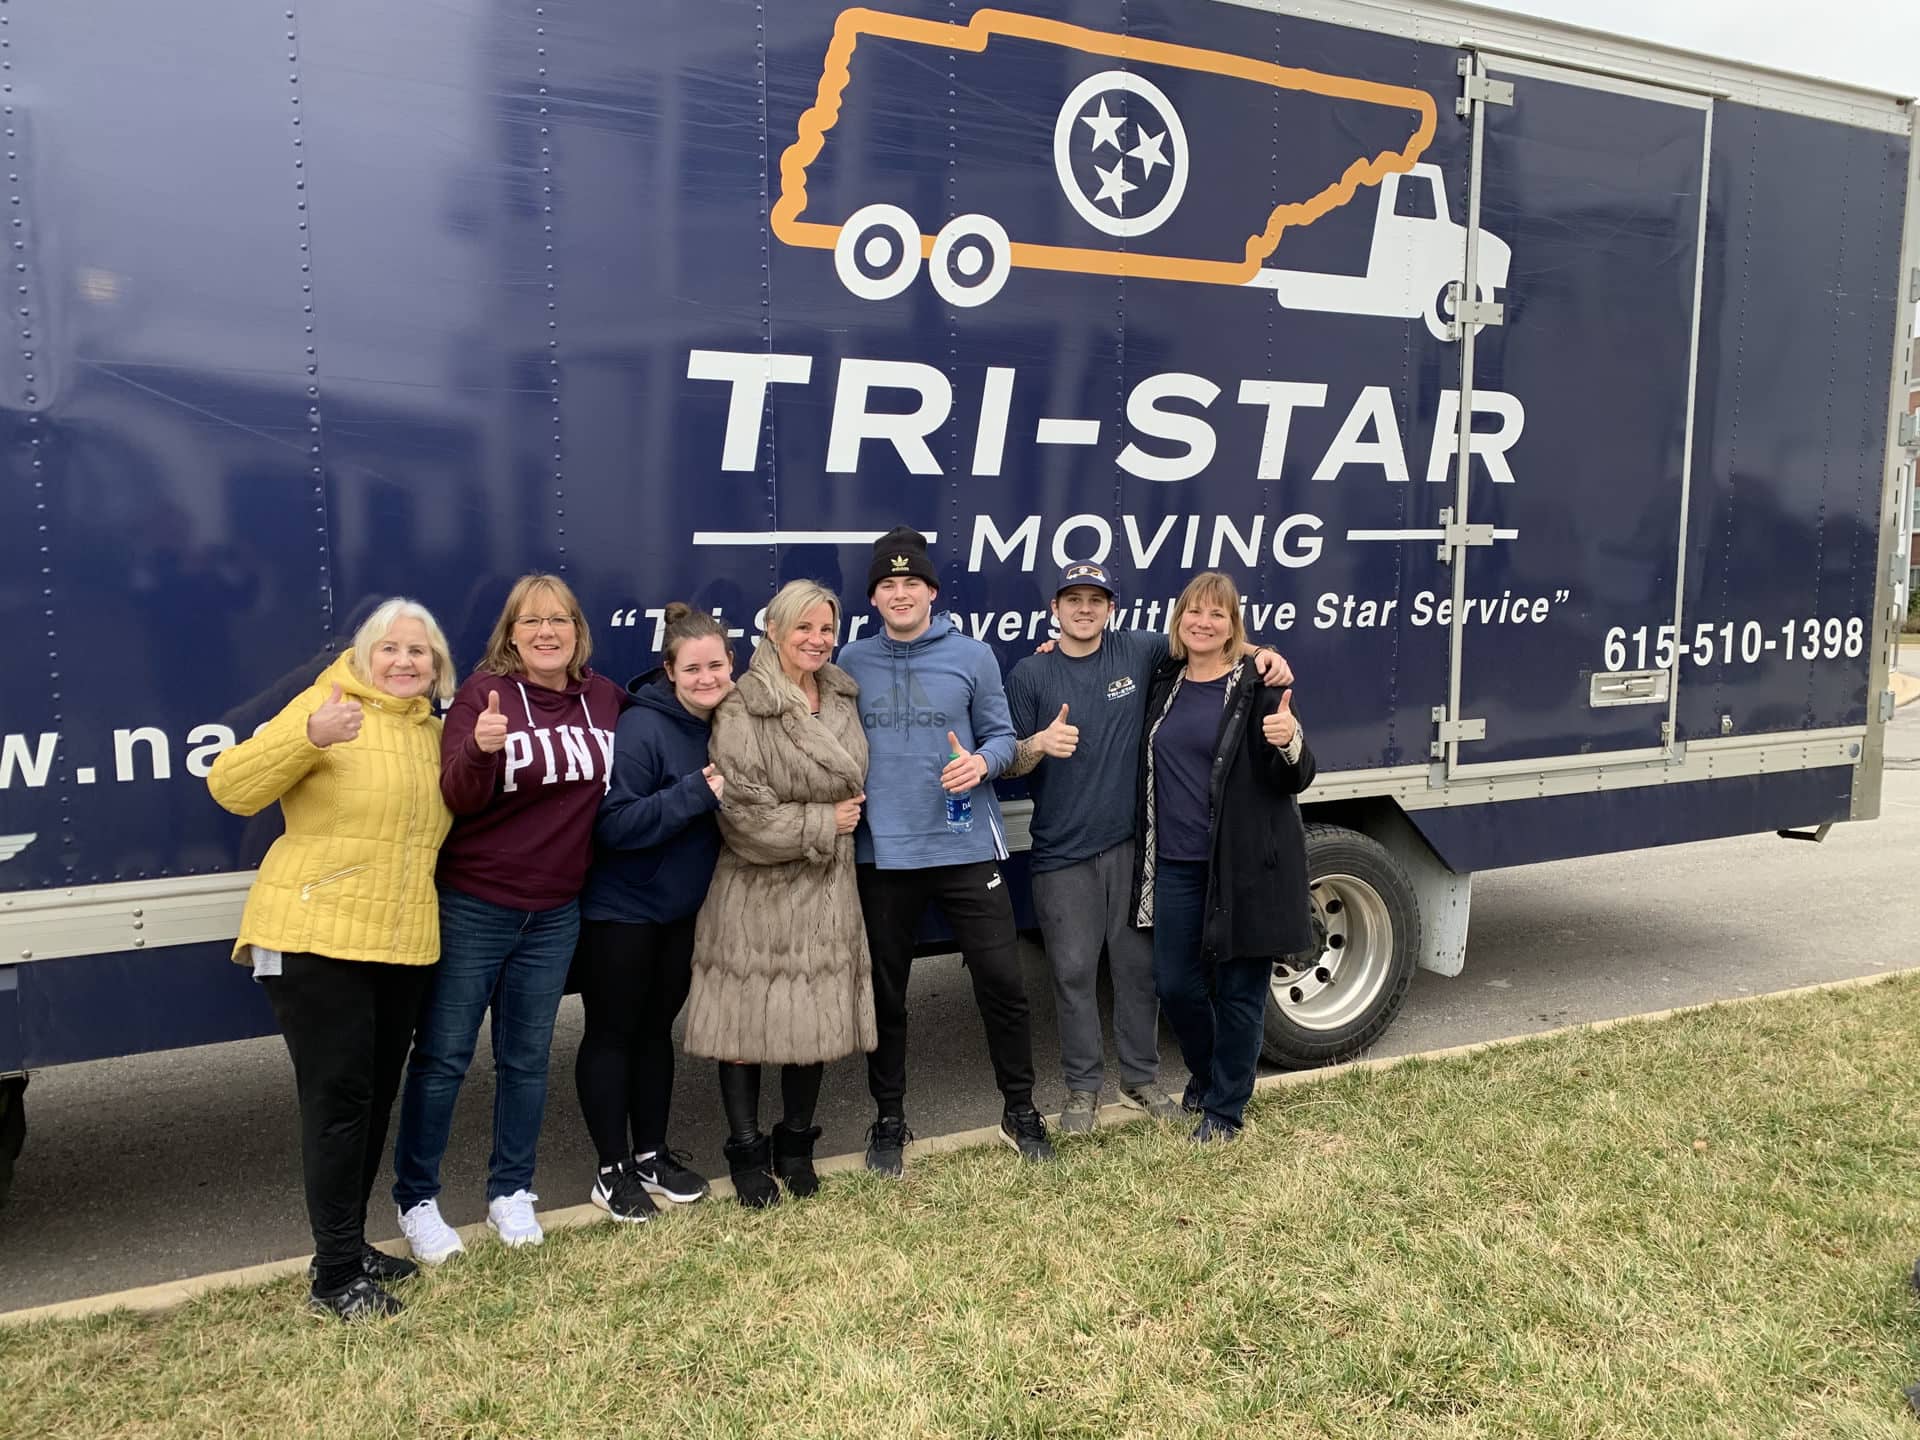 Staff and client photo in front of Tri-Star Moving truck